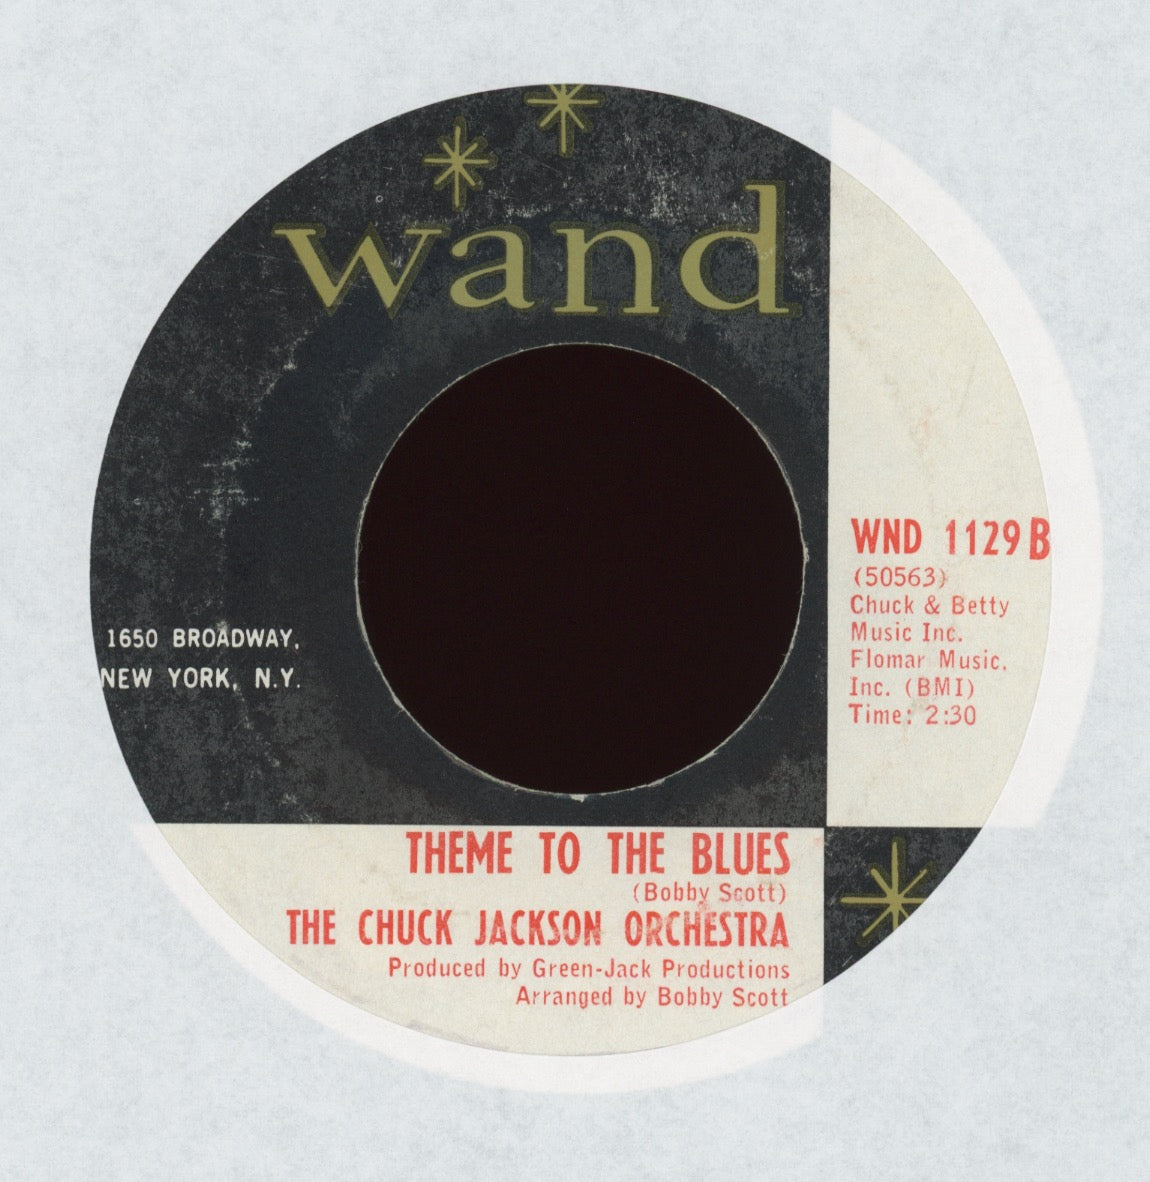 Chuck Jackson - These Chains Of Love (Are Breaking Me Down) on Wand Northern Soul 45